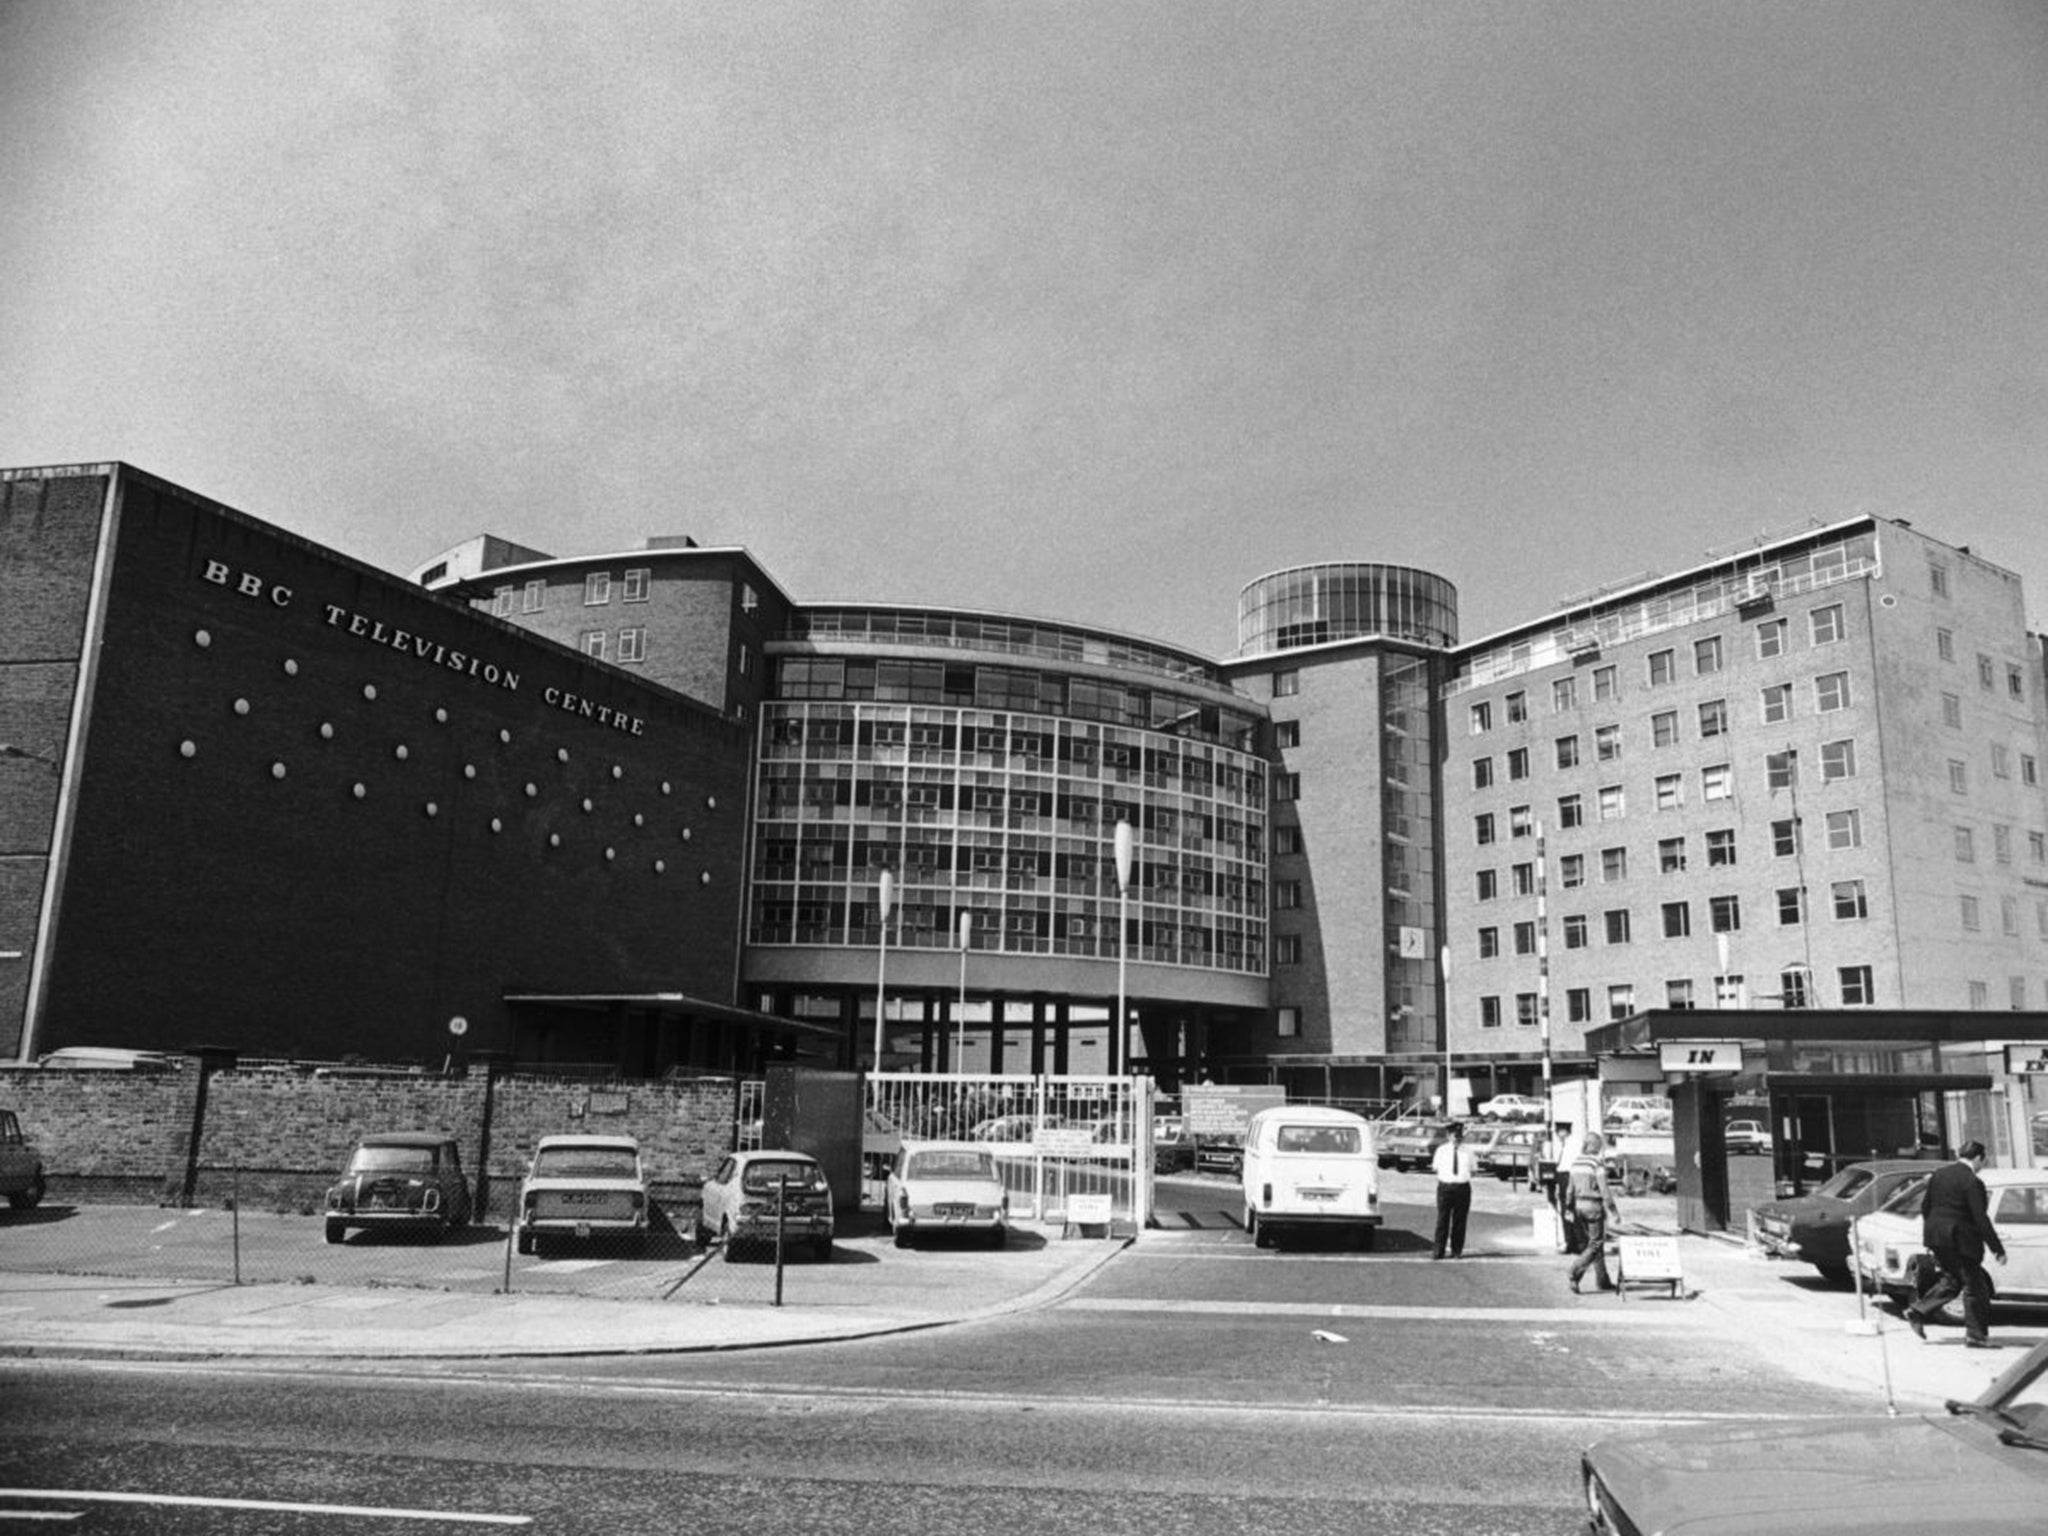 Television Centre, the home of Top of the Pops for many years